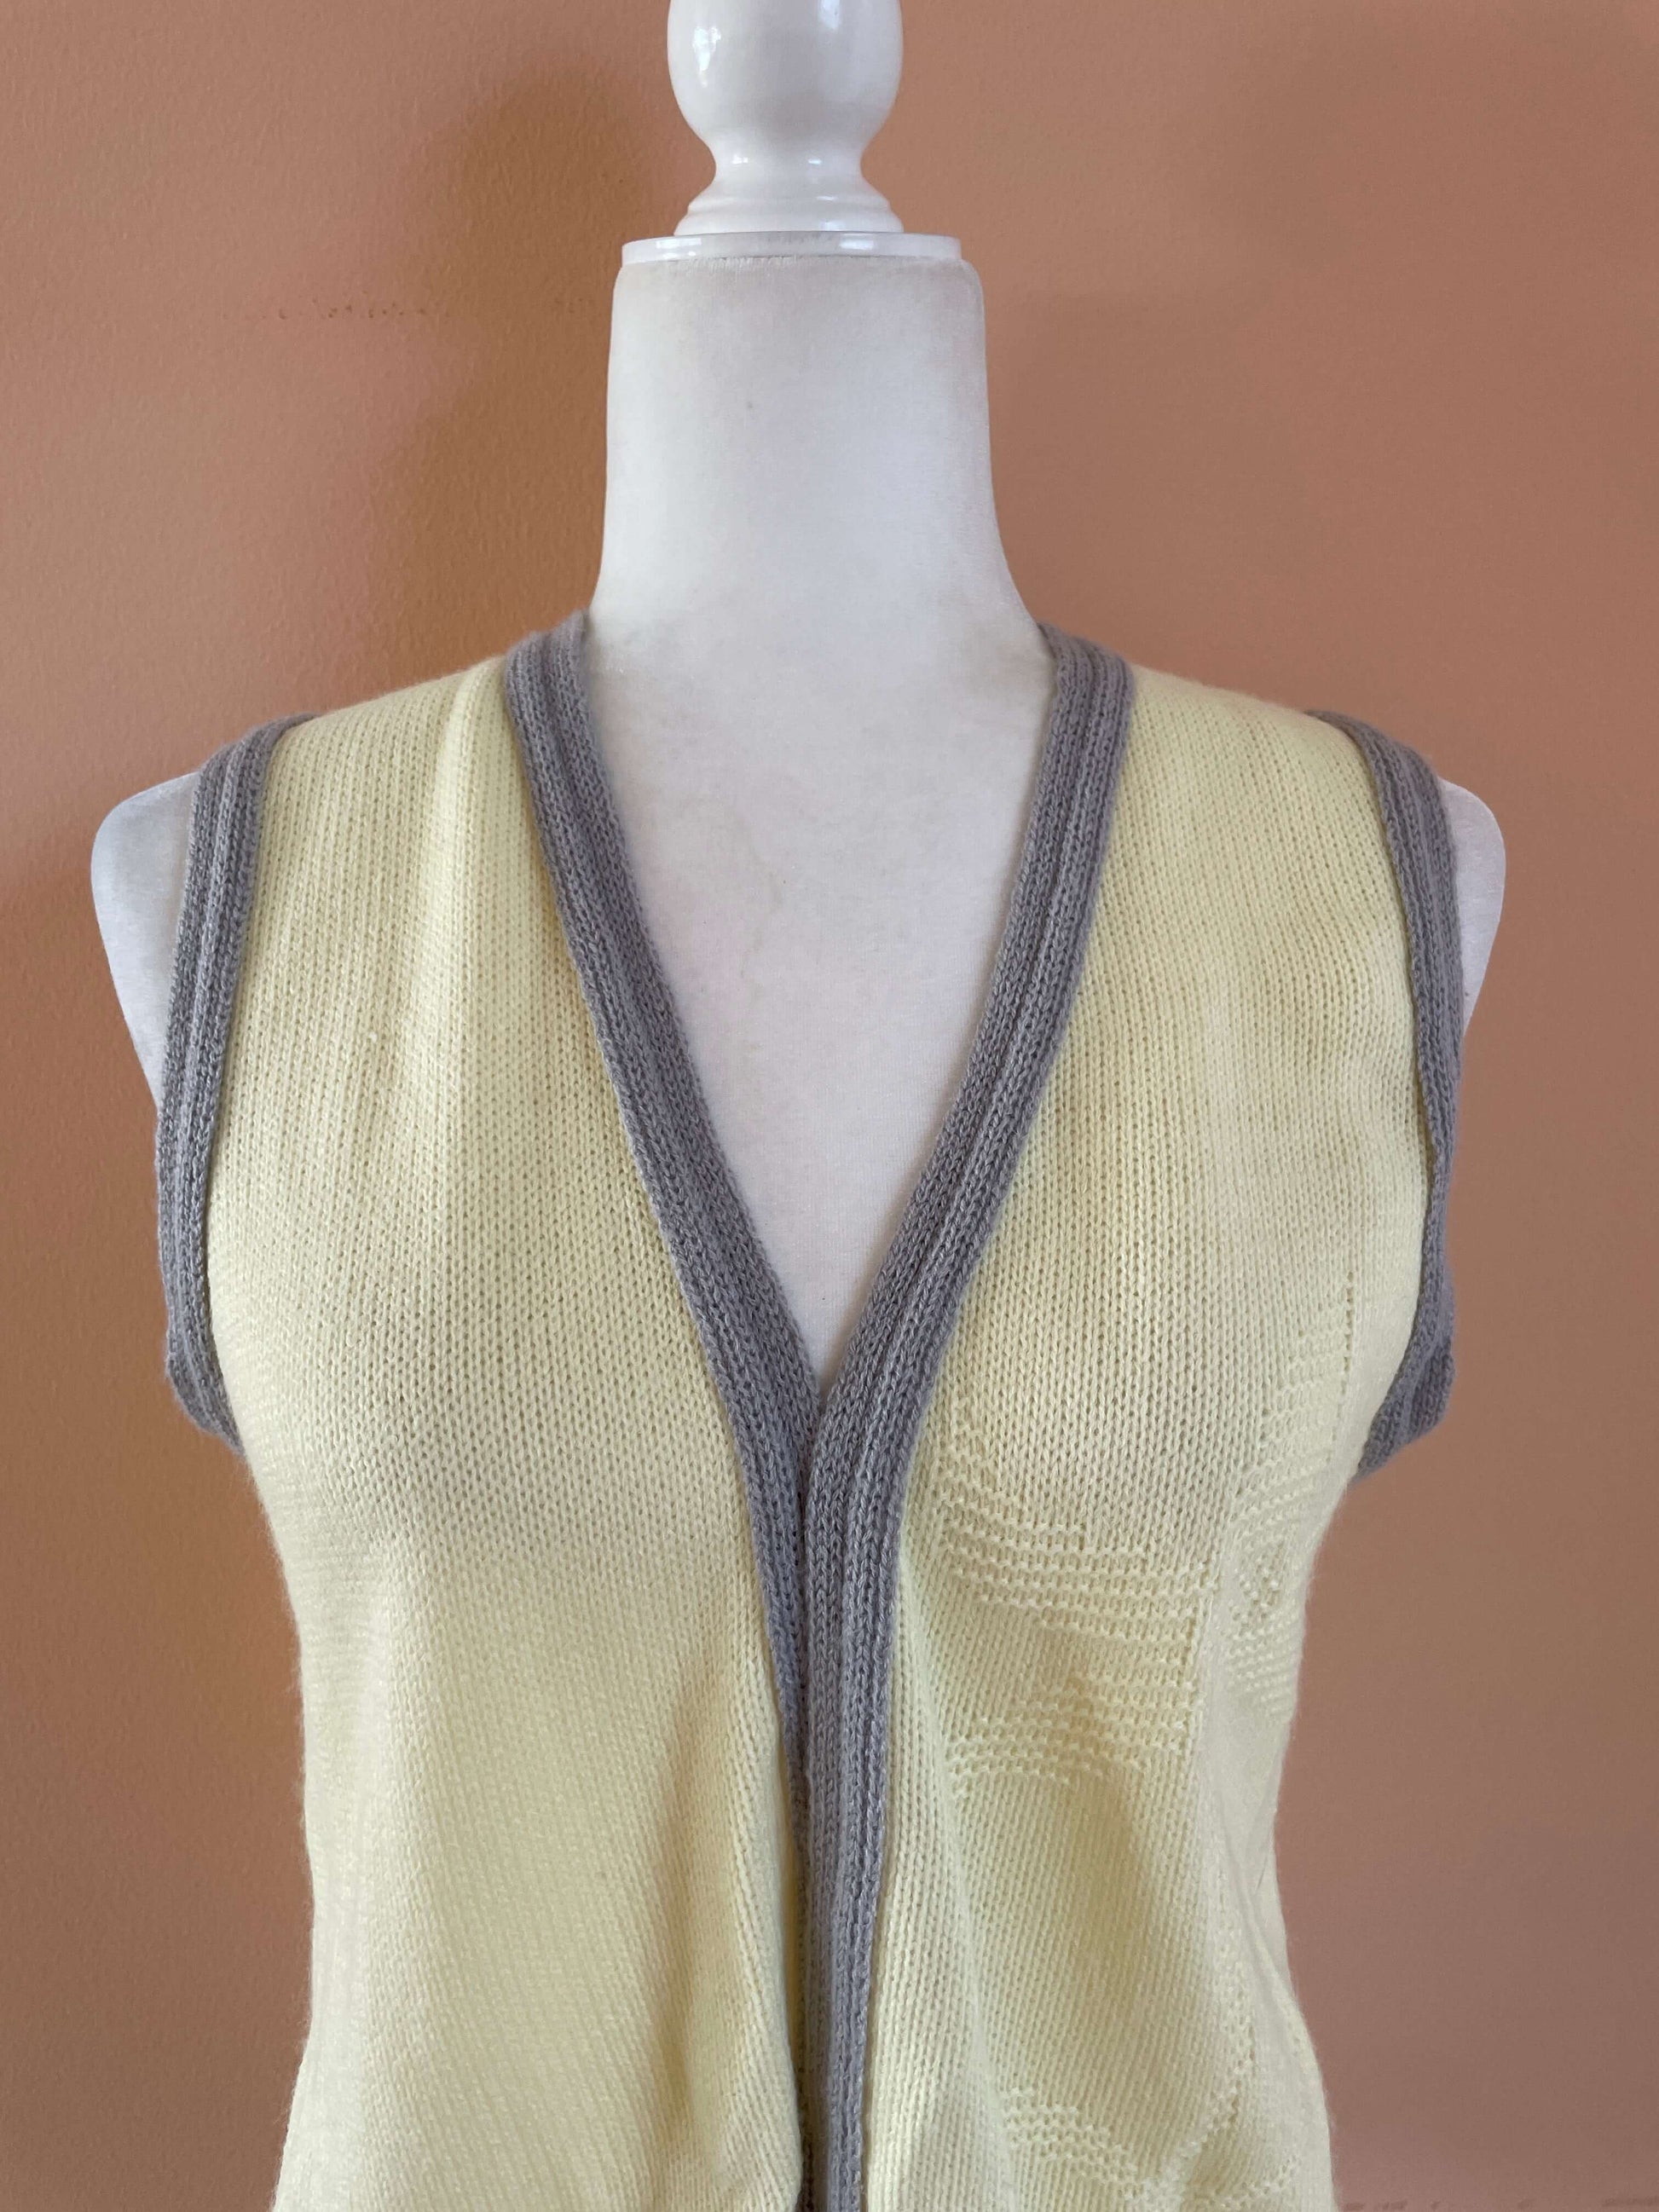  1980’s Acrylic Knit Pale Yellow Made in France Vest Top